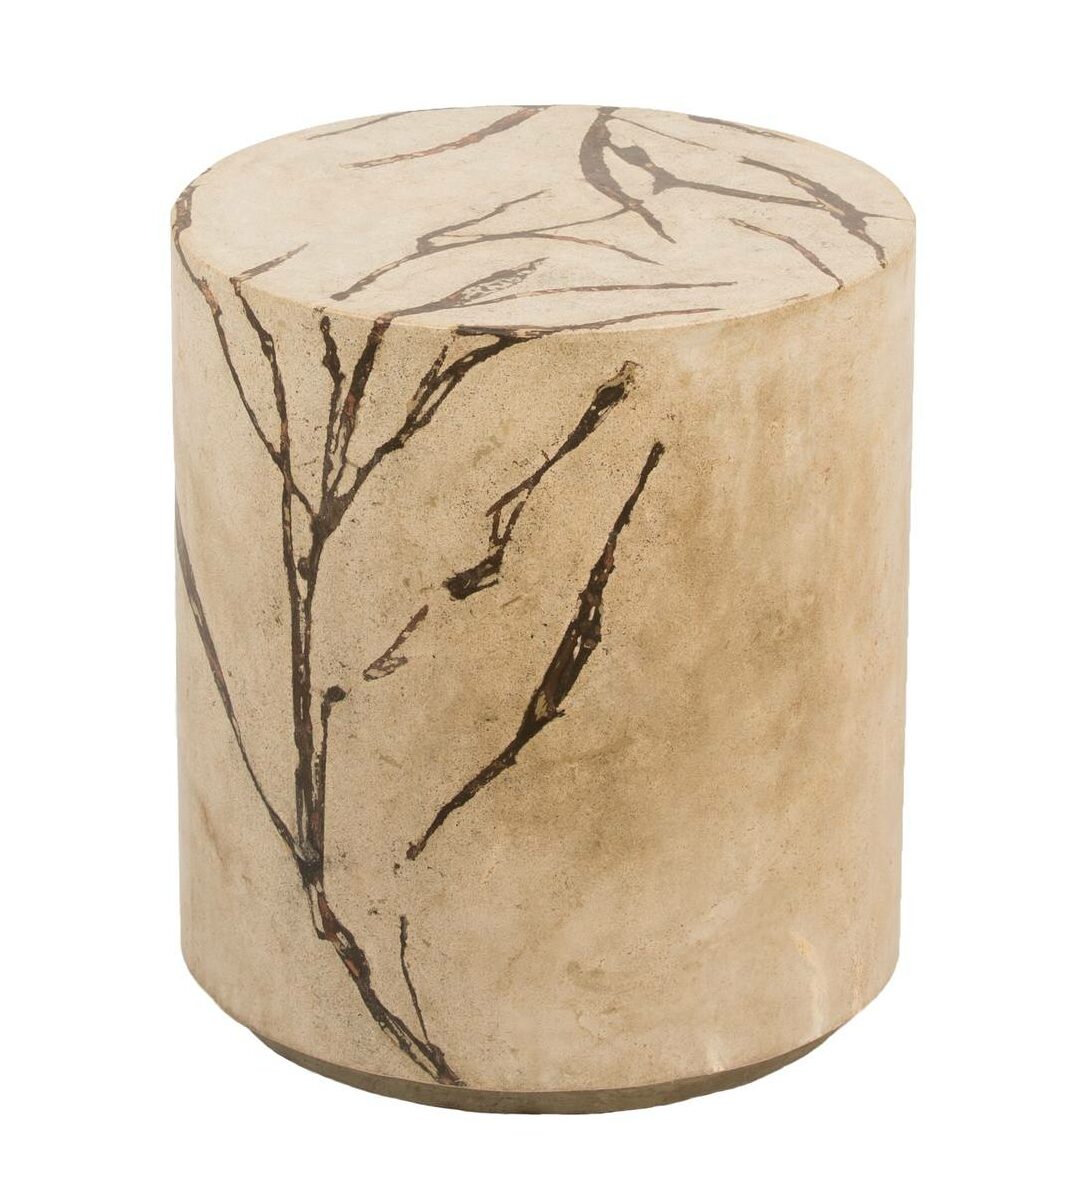 concrete side table with brown corn stalk impressions on top and sides